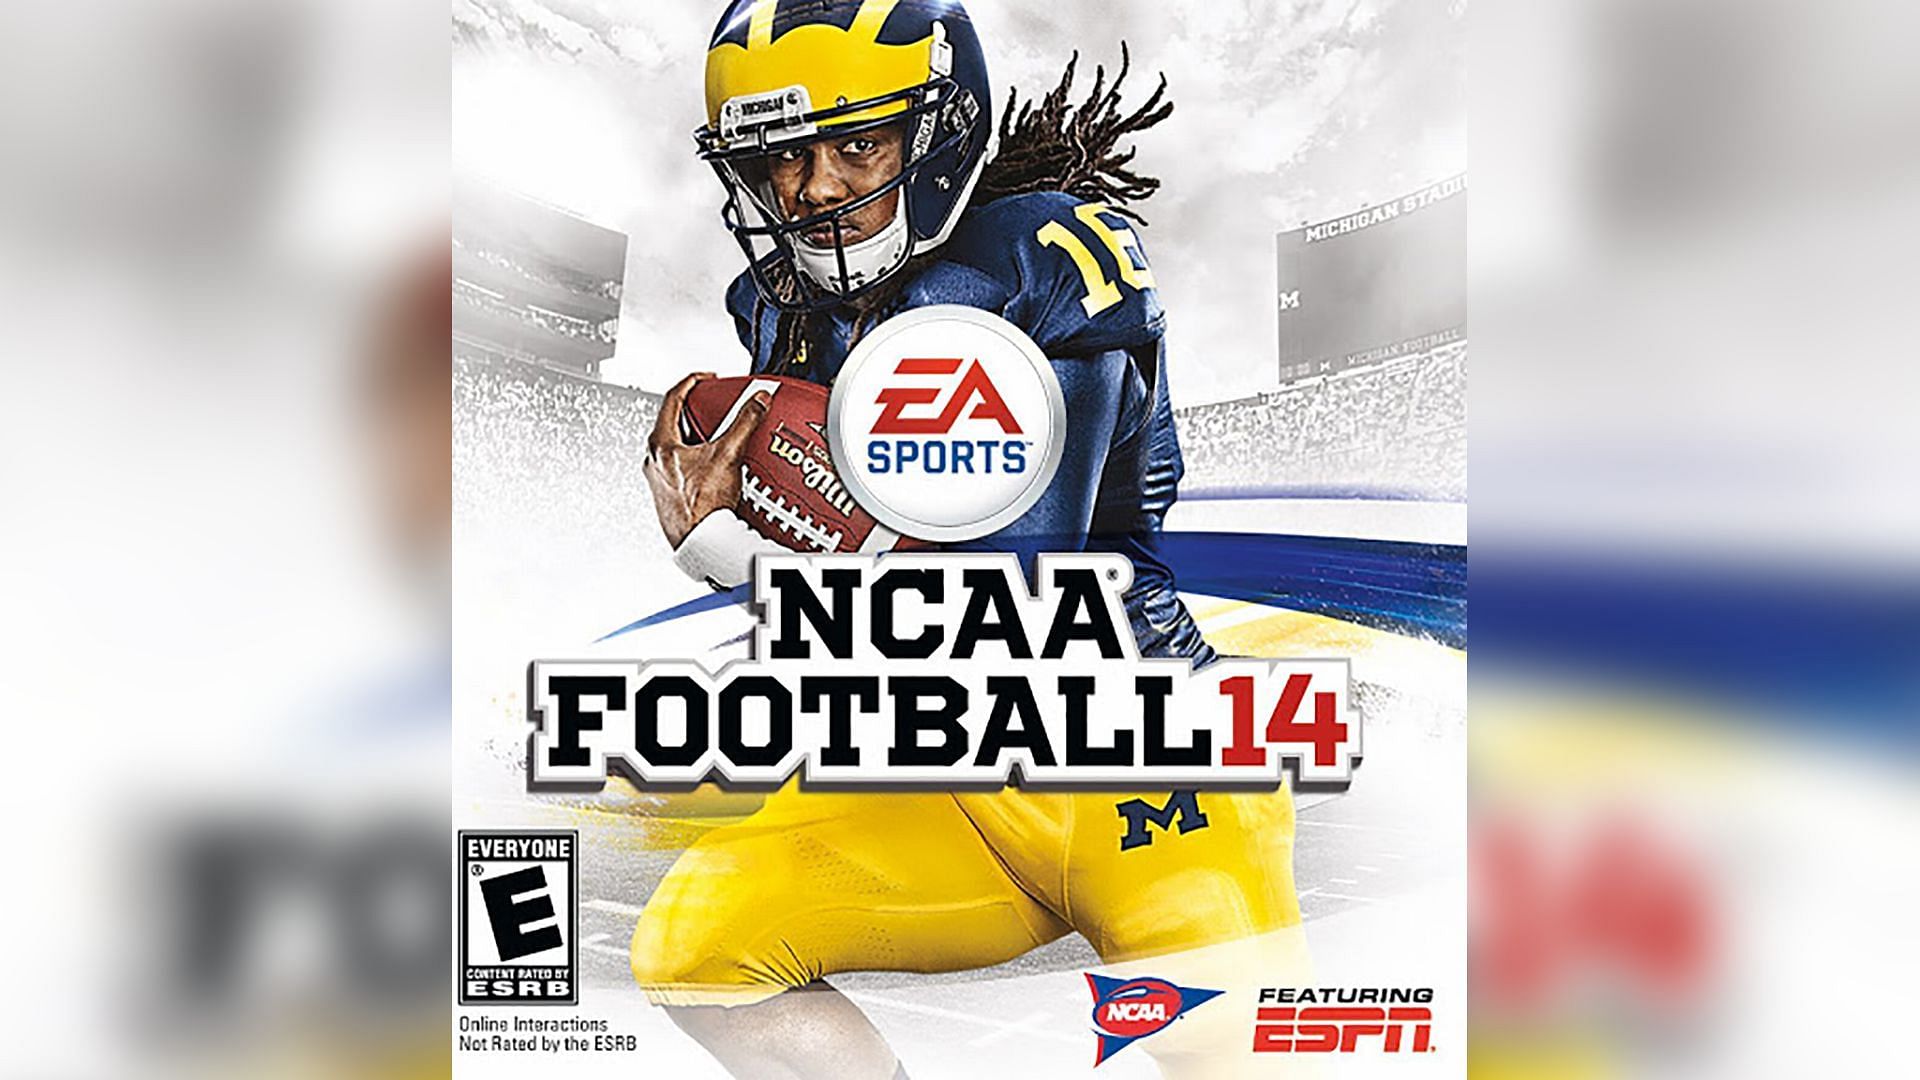 the last release of the NCAA football game by EA Sports was in 2014